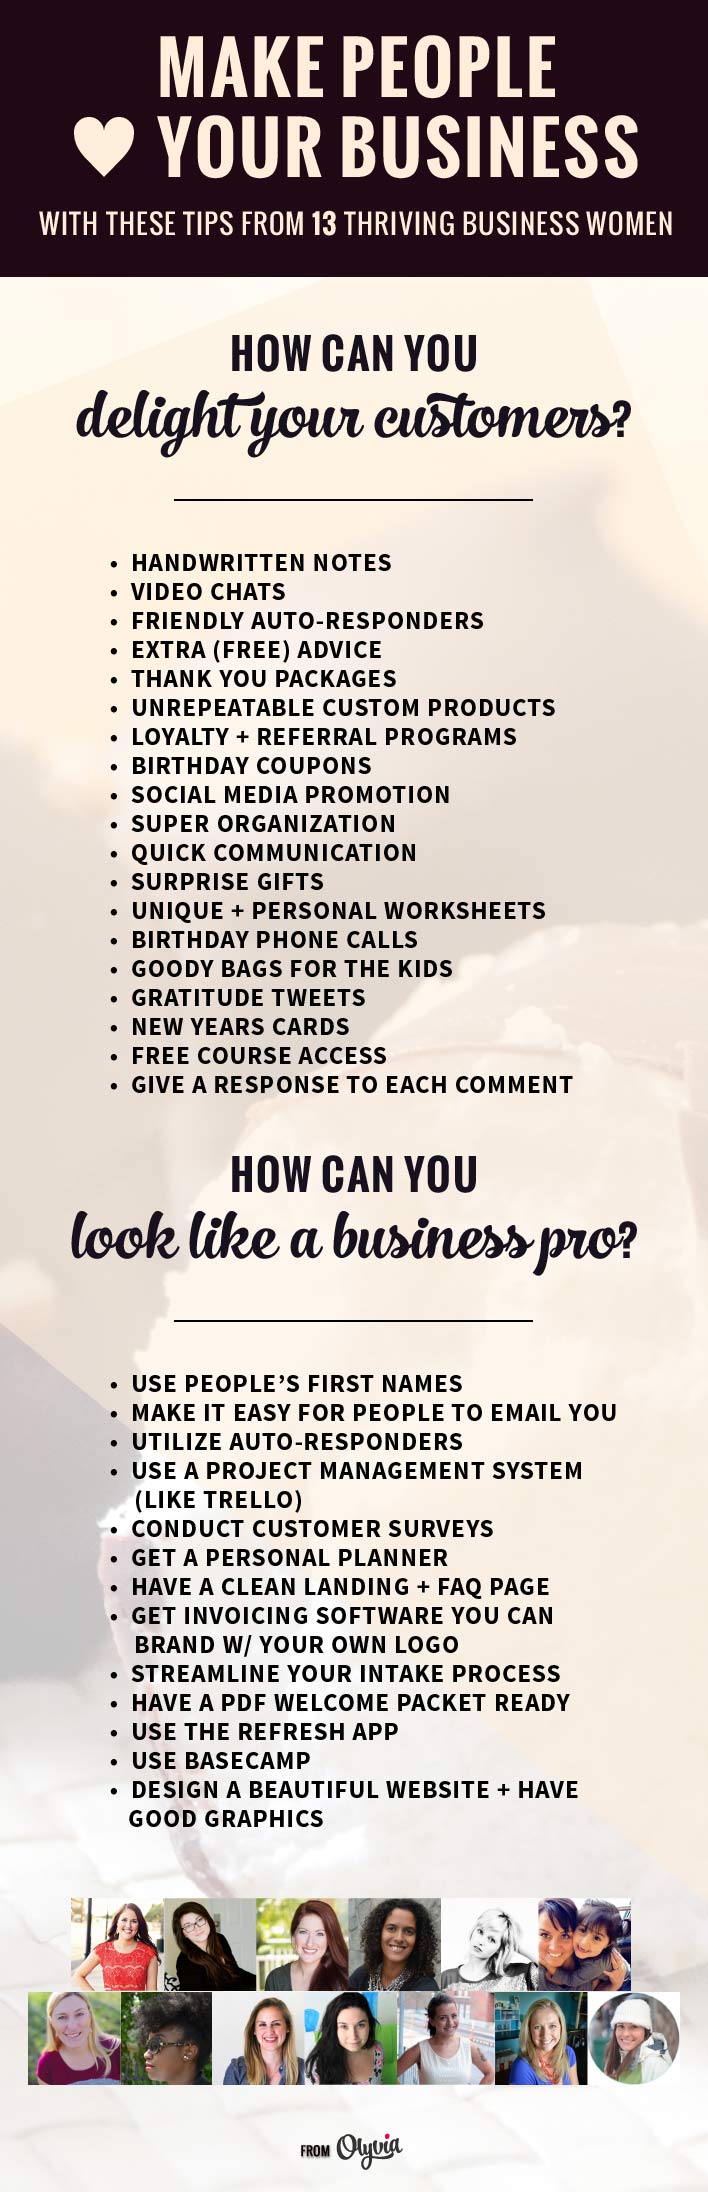 How To Delight Your Customers and Clients | 13 of today's thriving business women share their best tips on how you can look like a pro and make people love your business!